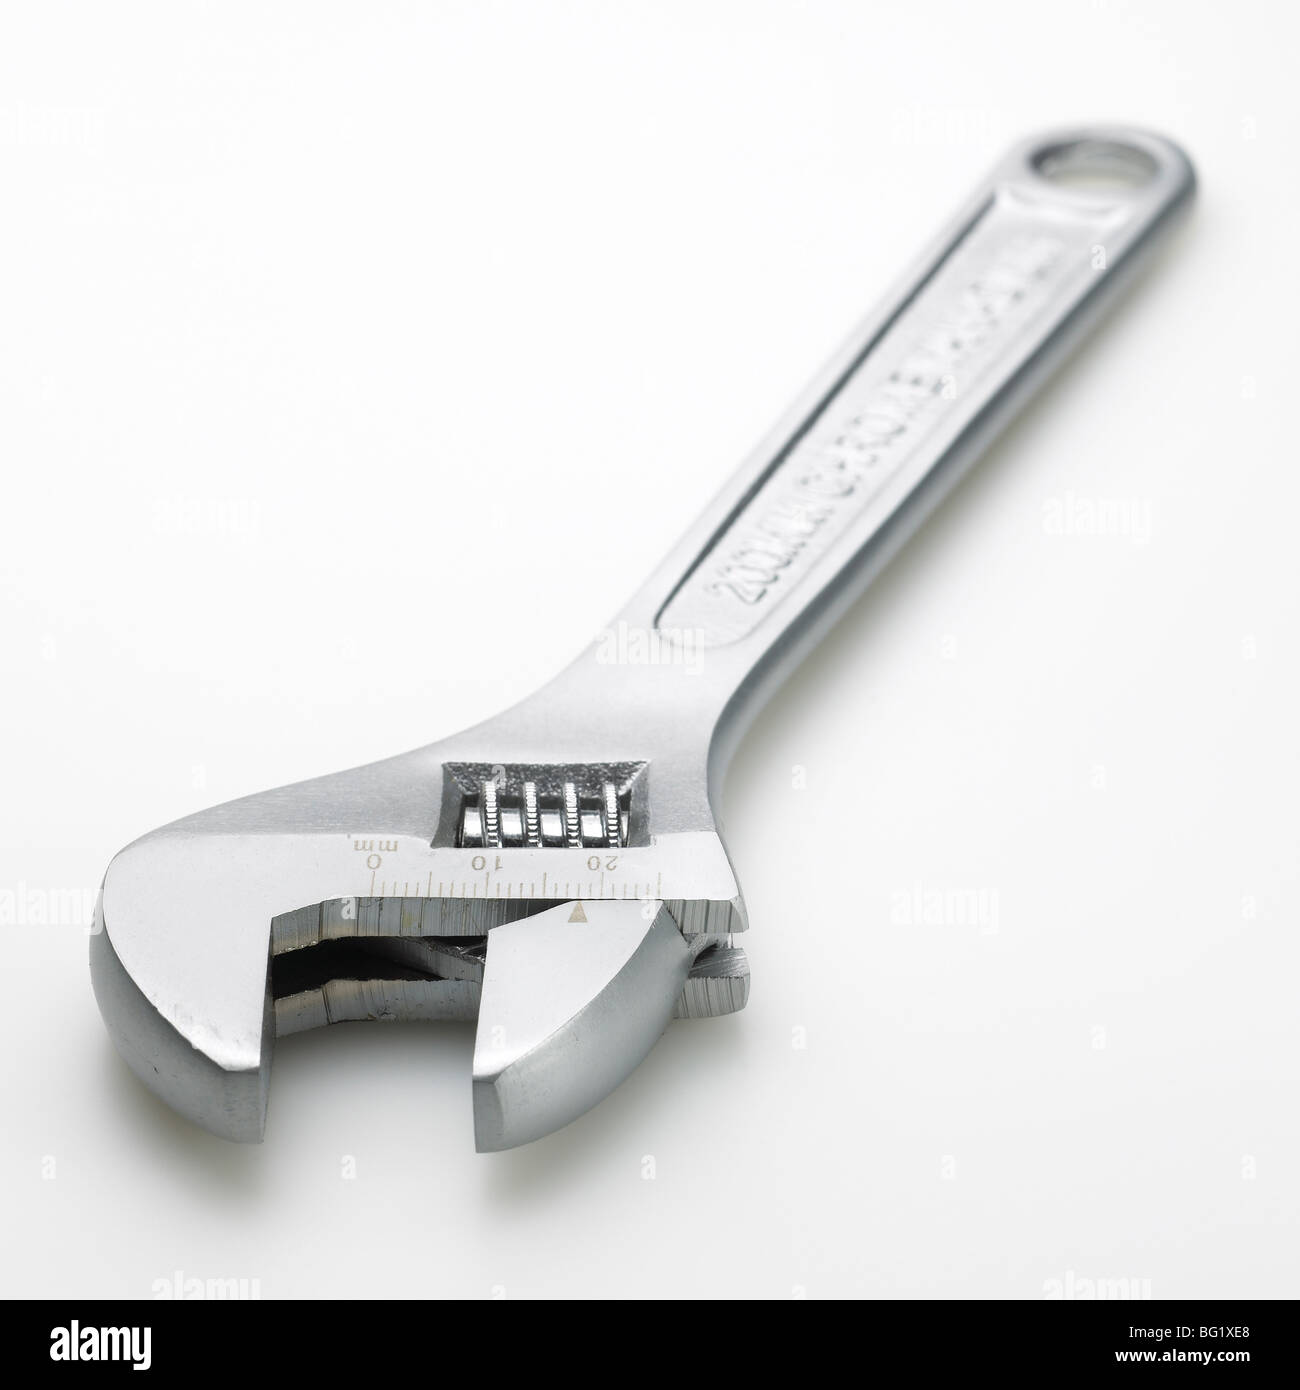 Stainless adjustable wrench on white background Stock Photo